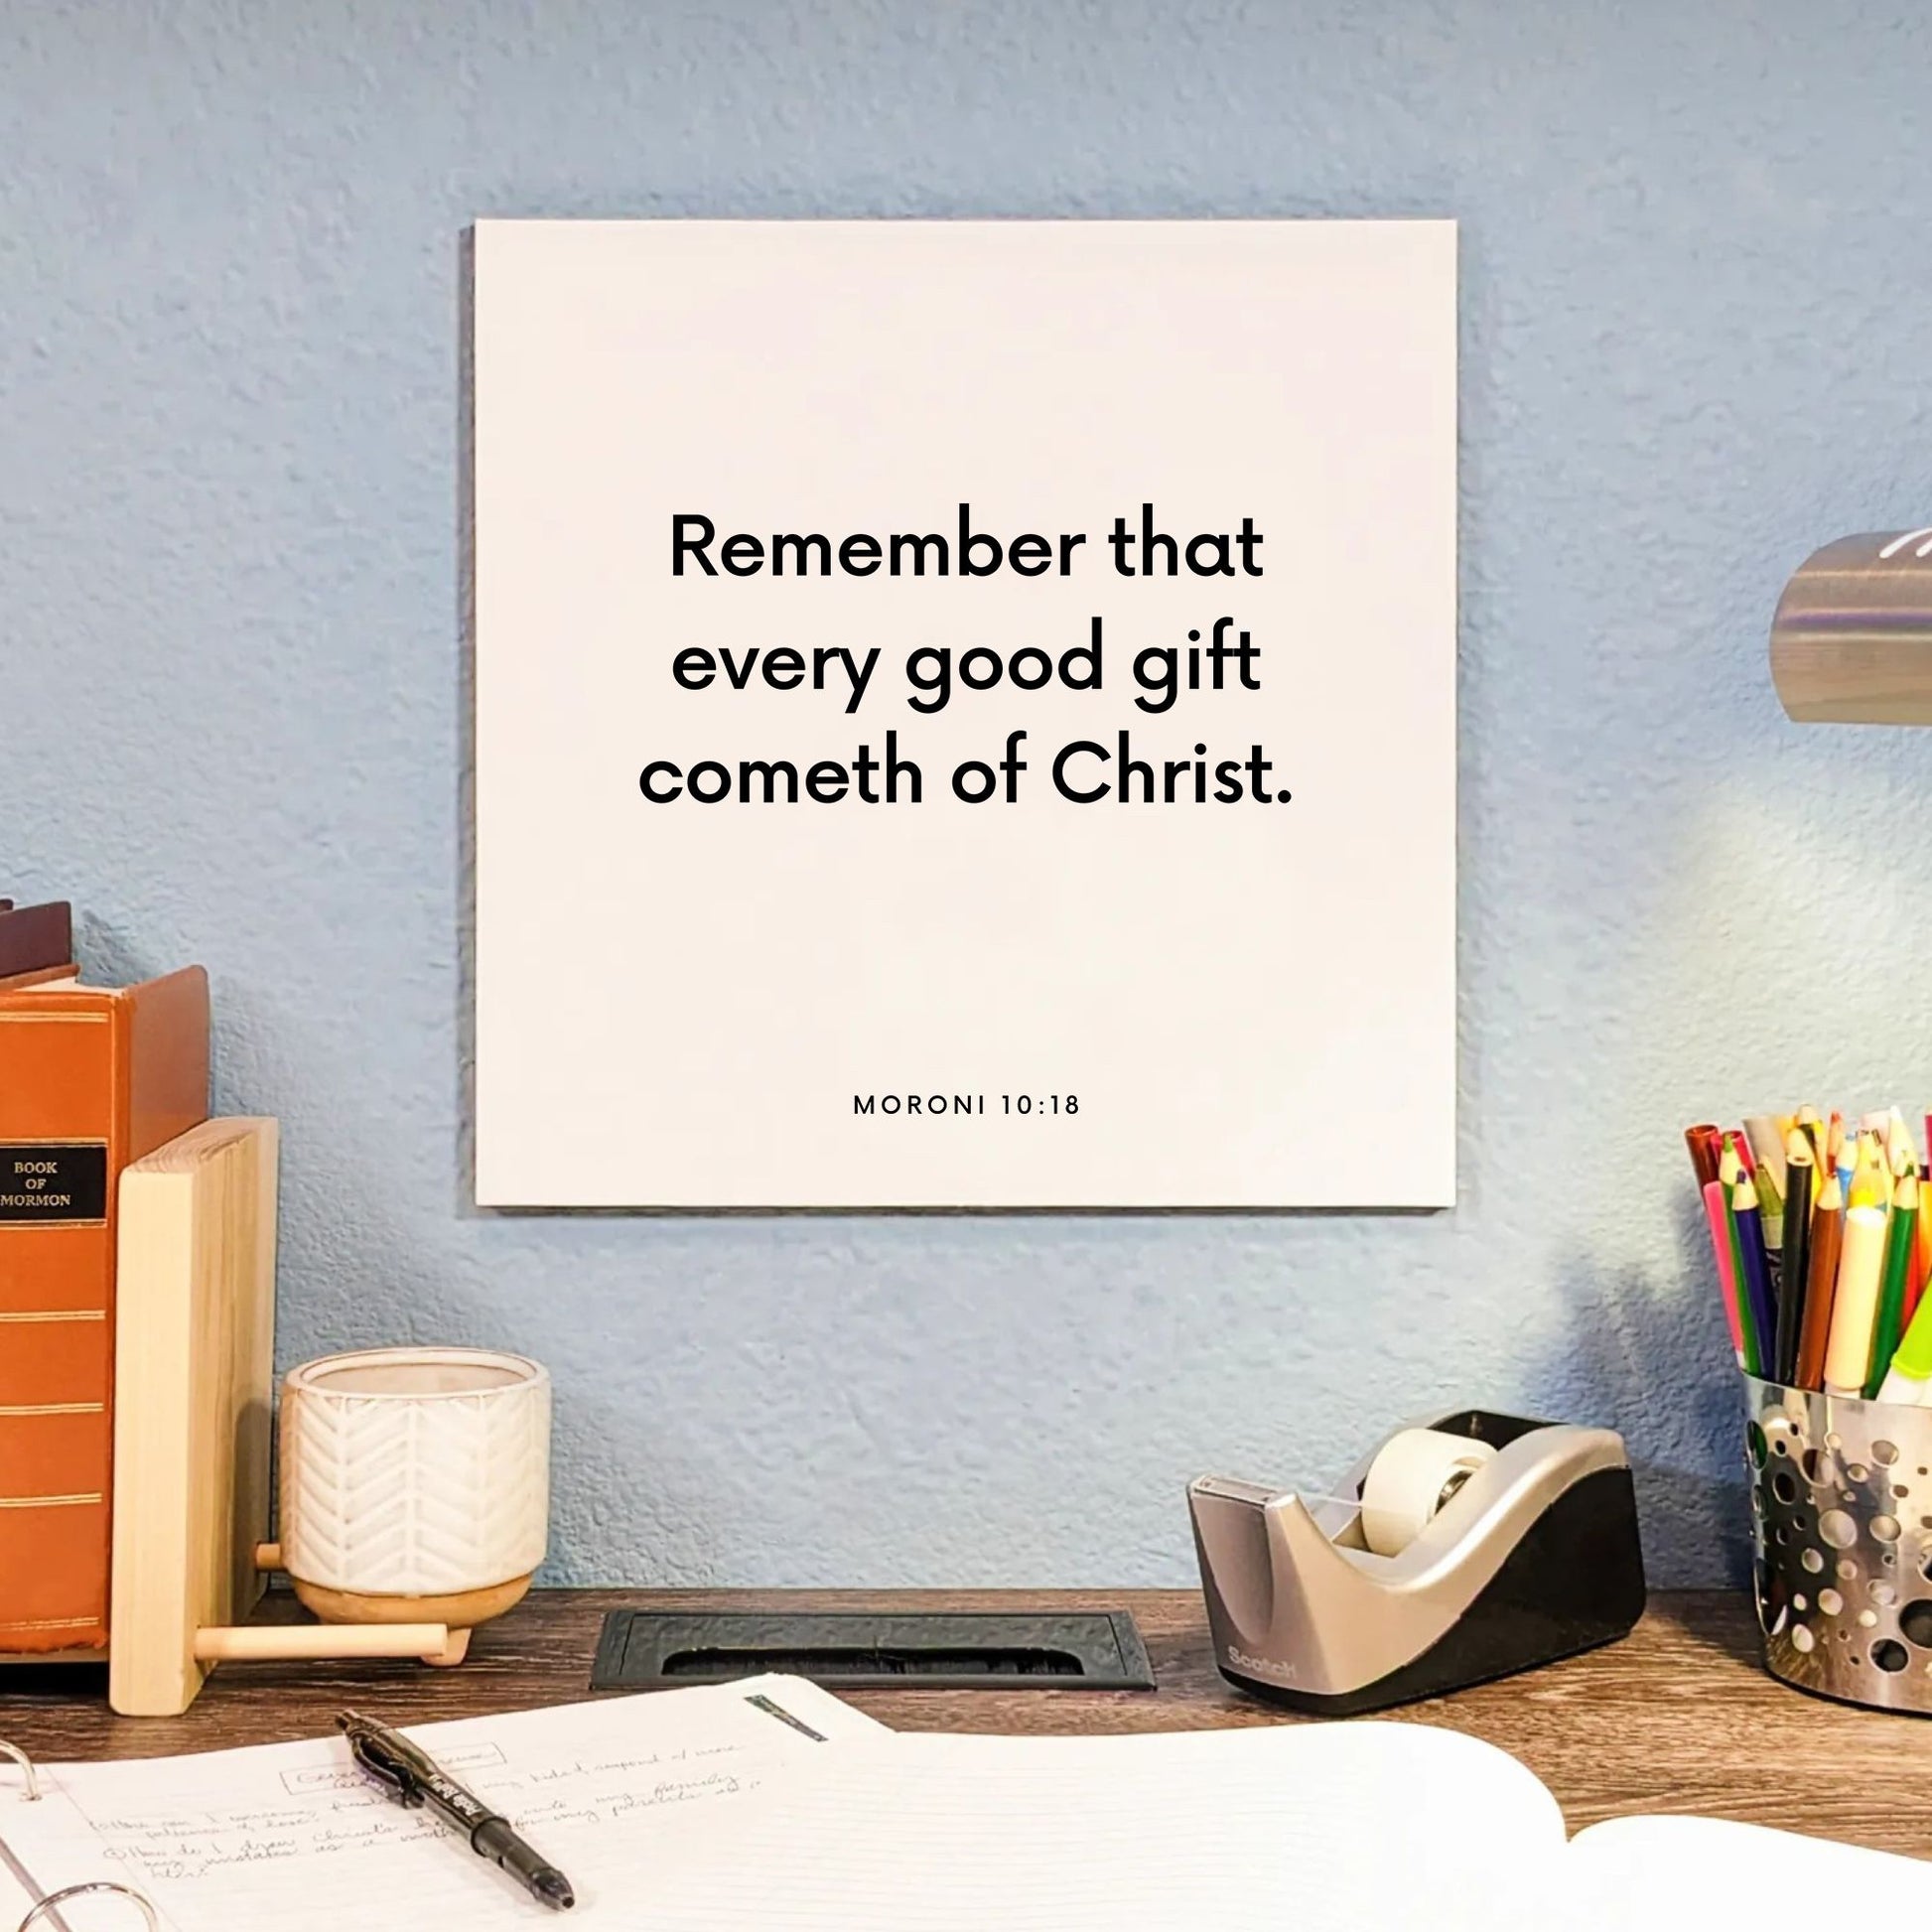 Desk mouting of the scripture tile for Moroni 10:18 - "Every good gift cometh of Christ"